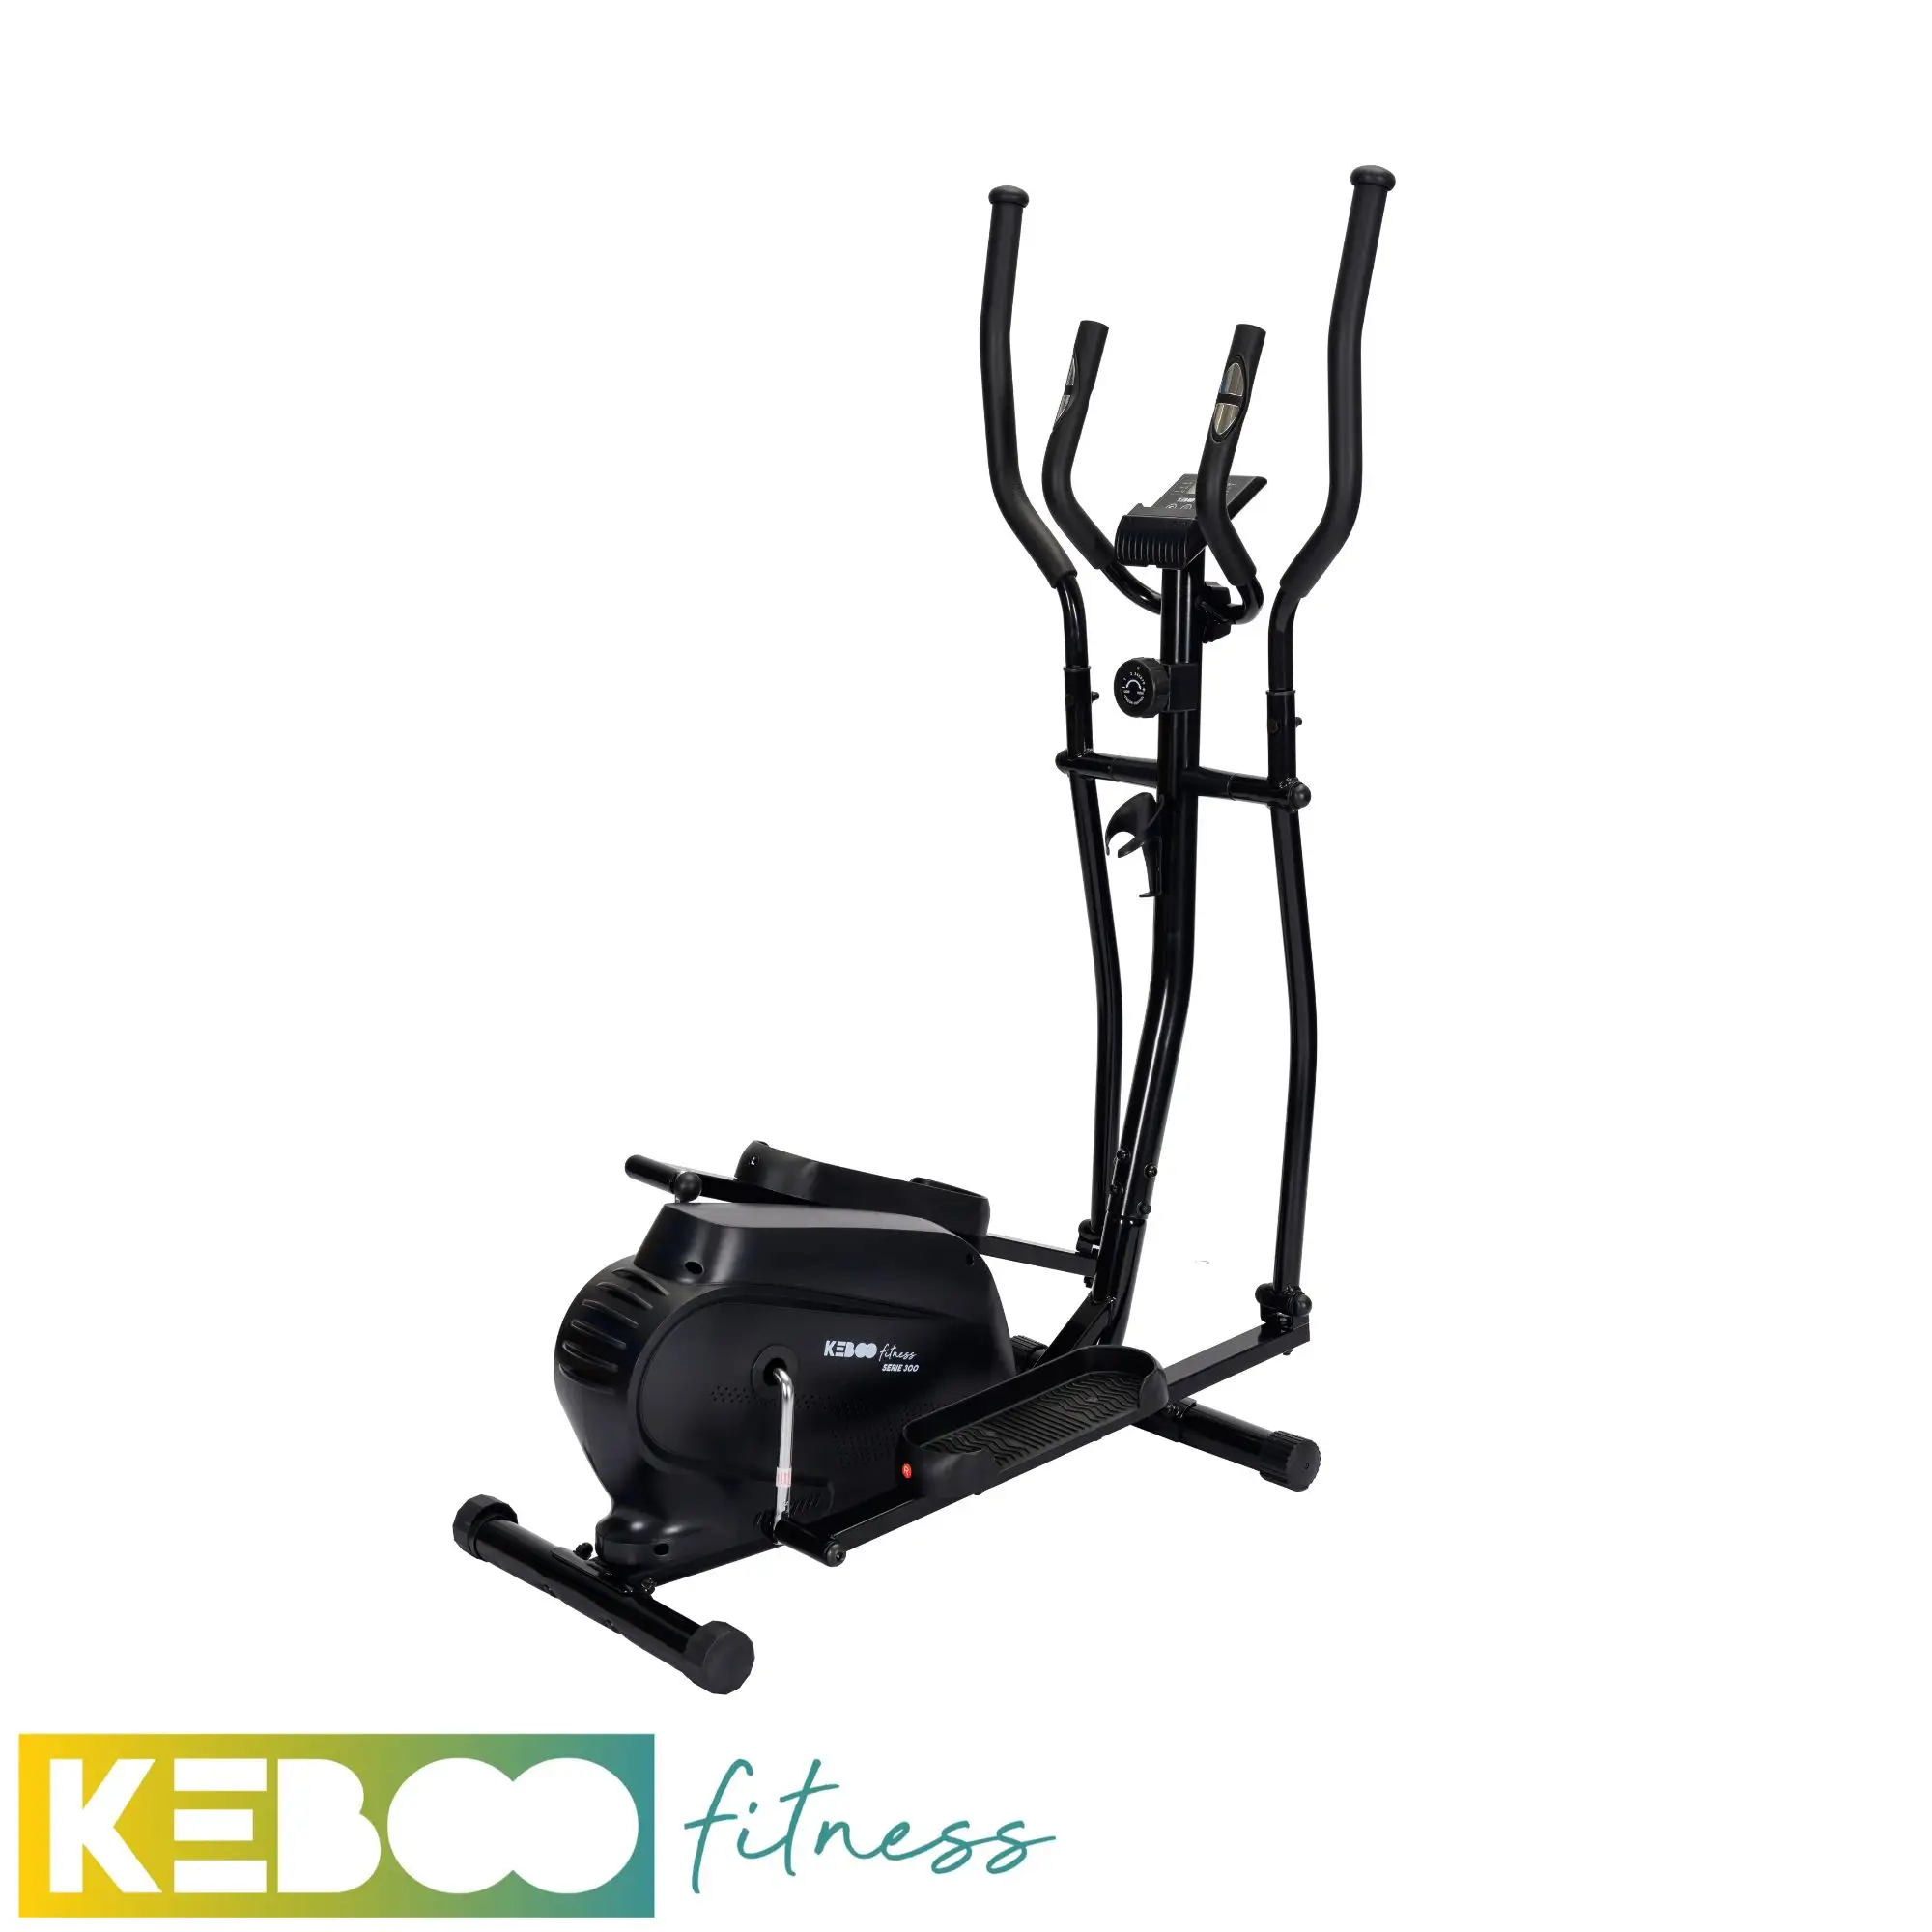 Elliptical Bike with Multifunction Computer and 3 kg Disc | Gym Equipment Ready to Ship From Spain